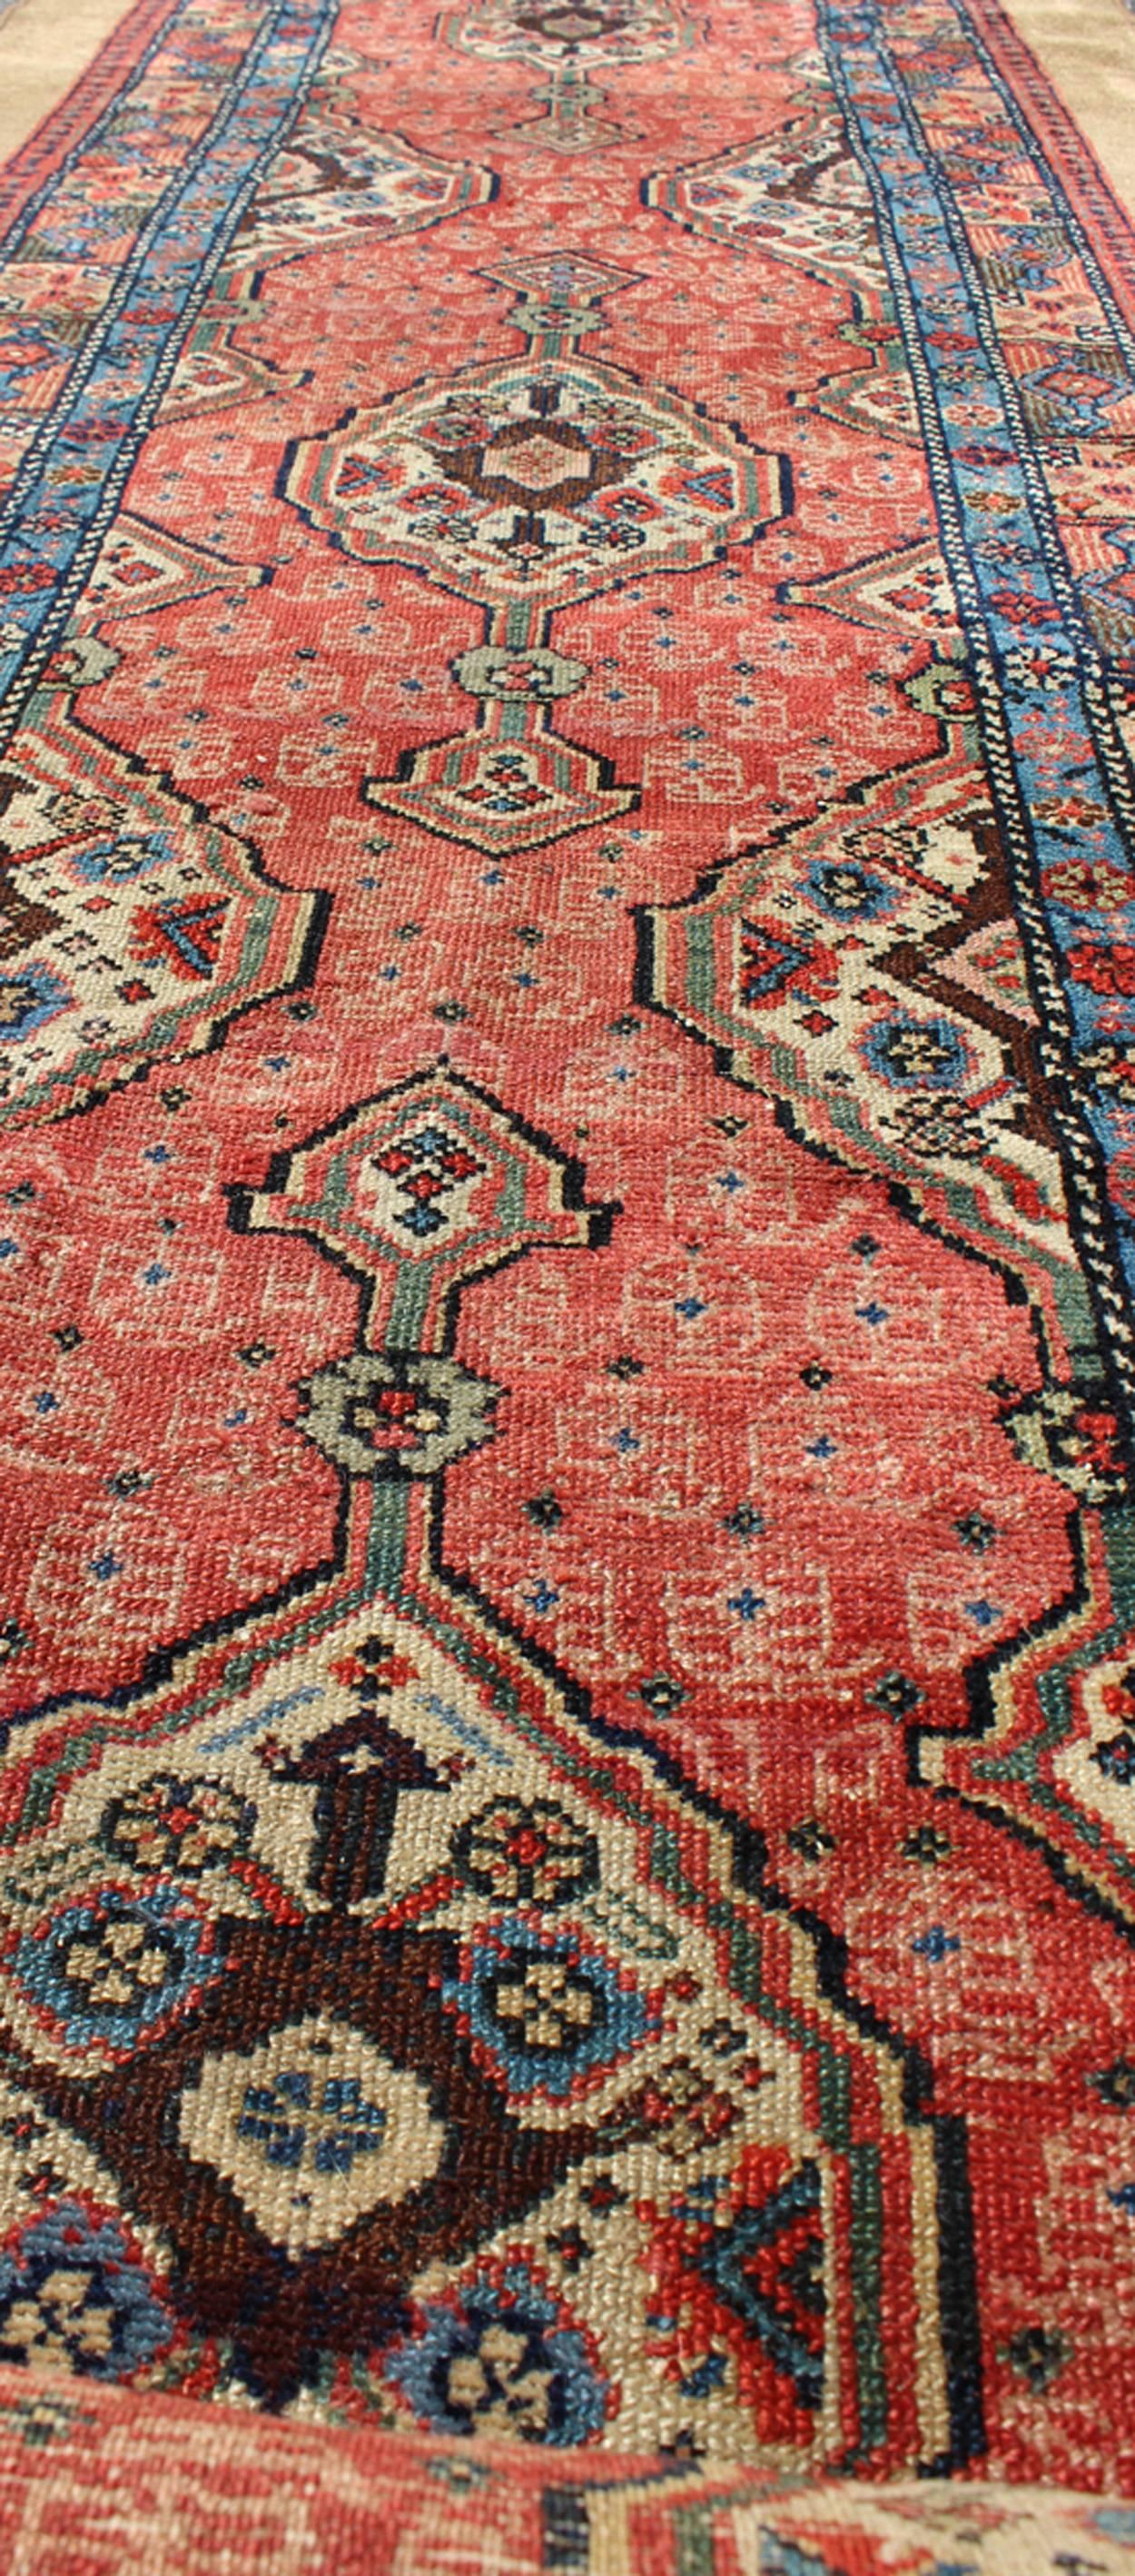 Early 20th Century Antique Persian Serab Runner with Vertical Sub-Geometric Medallions